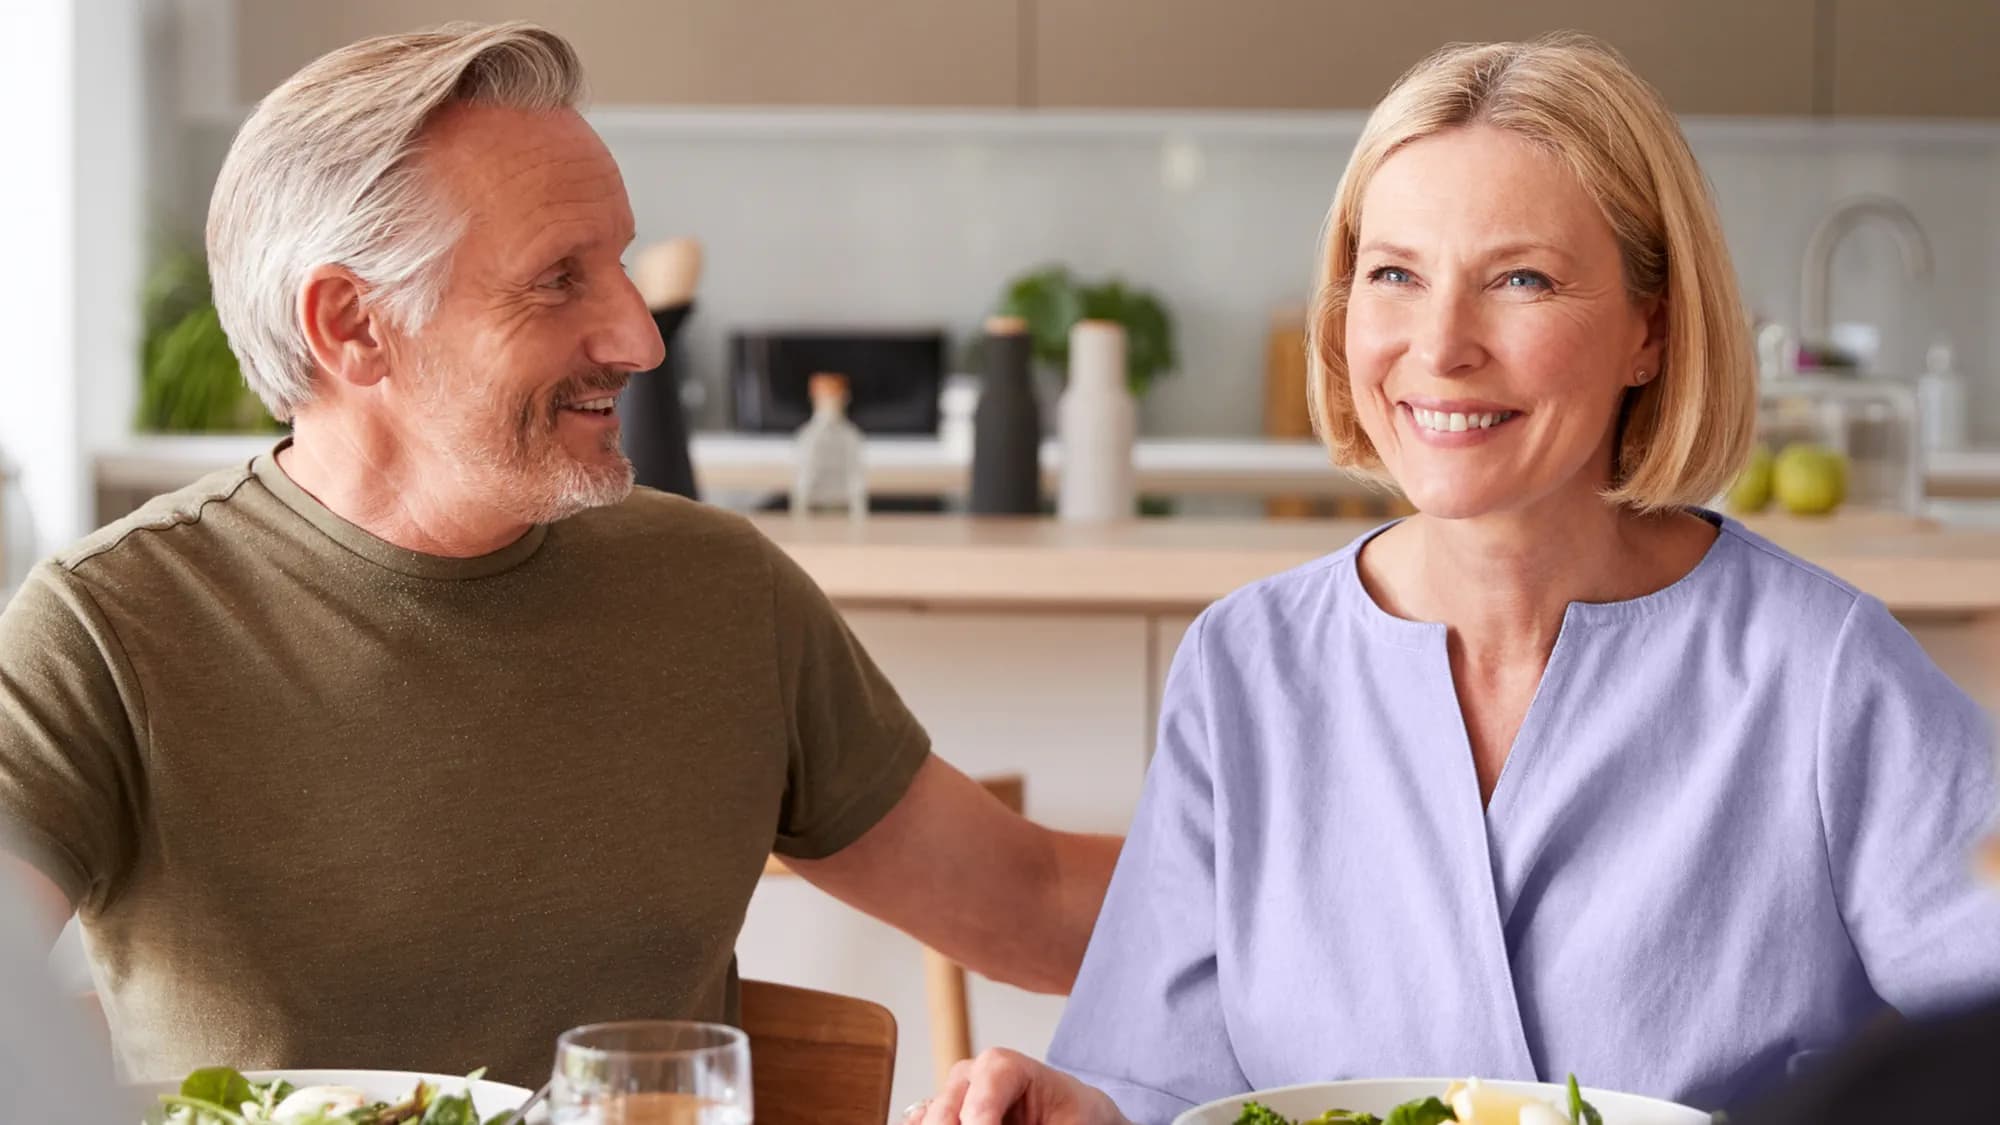 Hearing aids can really make a difference to your marriage